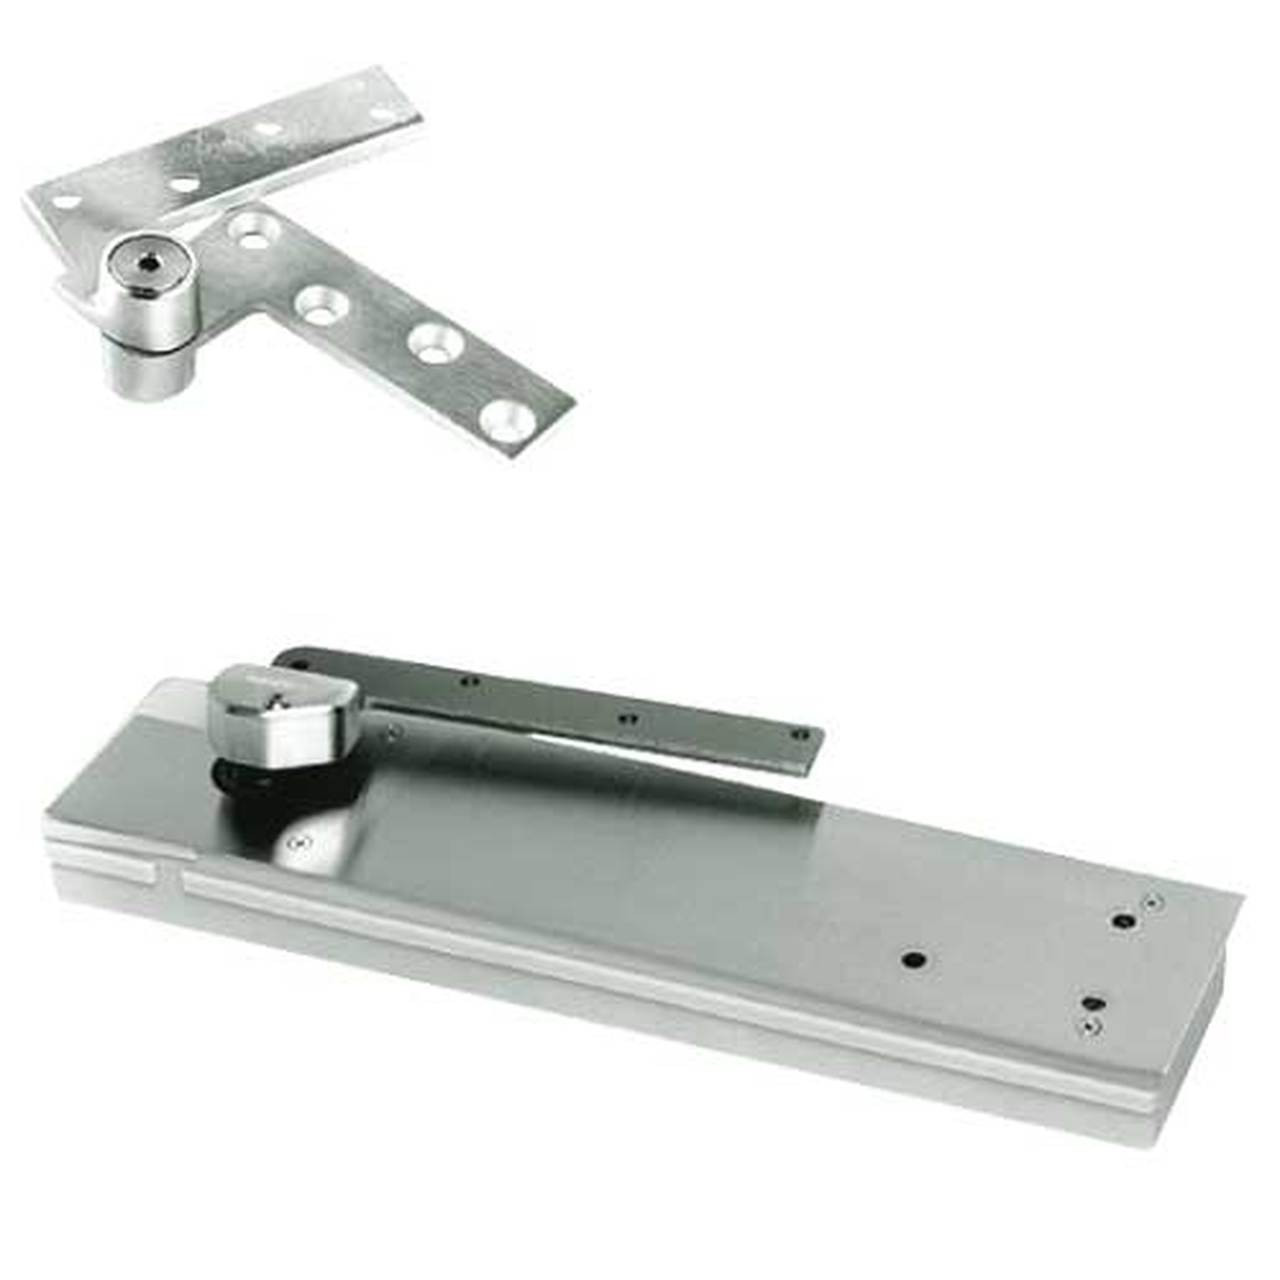 FHM5103NBC-RH-618 Rixson HM51 Series 3/4" Offset Hung Shallow Depth Floor Closers in Bright Nickel Finish